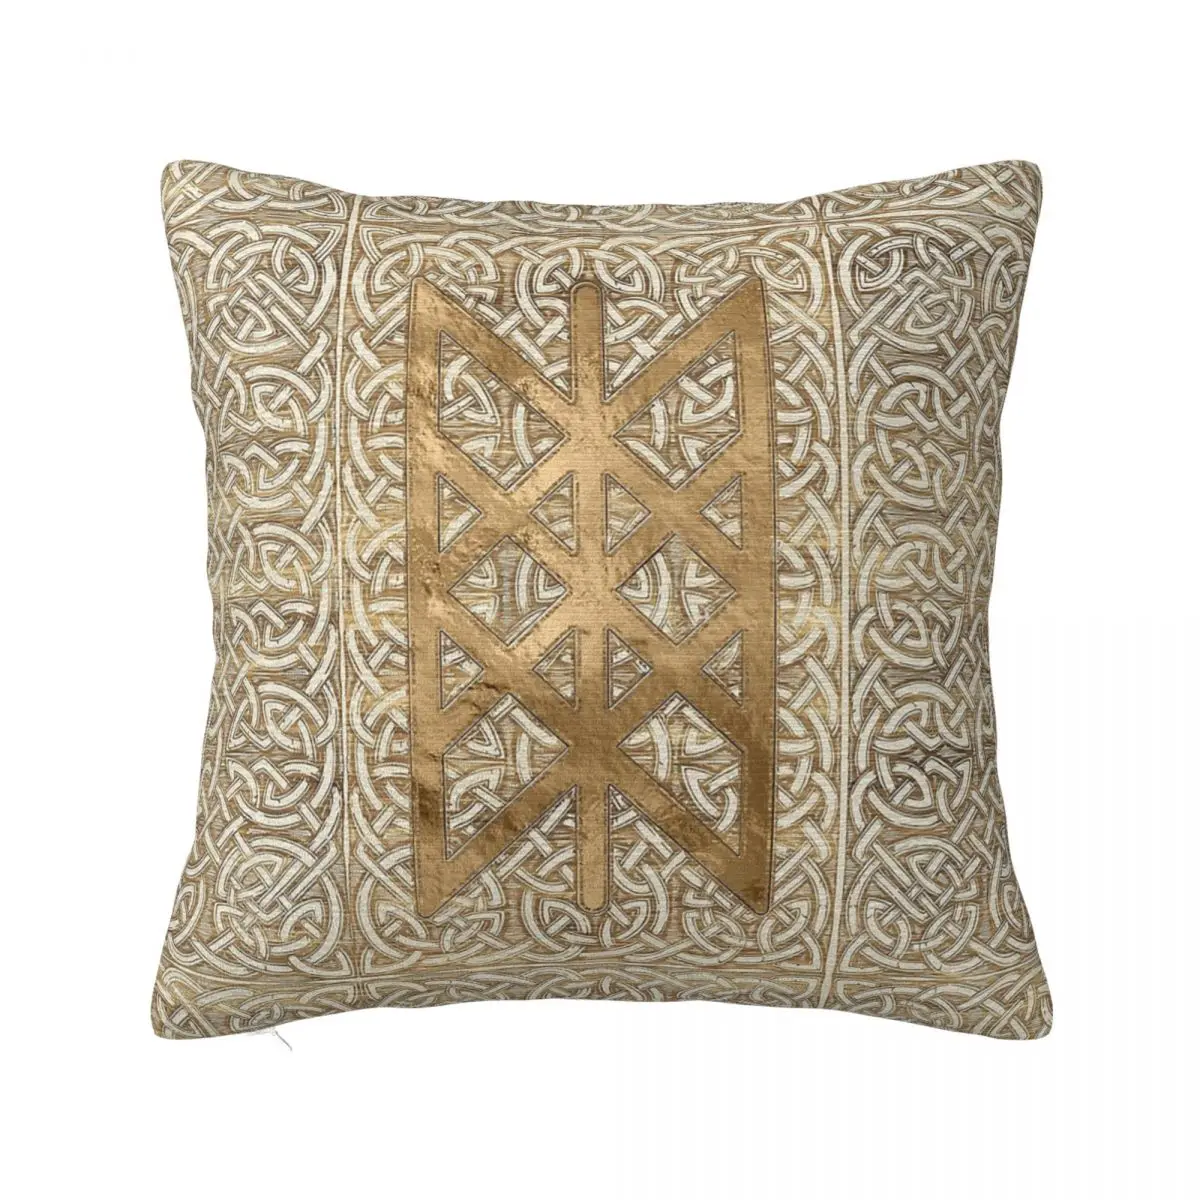 Web Of Wyrd The Matrix Of Fate Vintage Gold vikings runes Throw Pillowcase Cover for Home Cushion Cover Decorations Printing